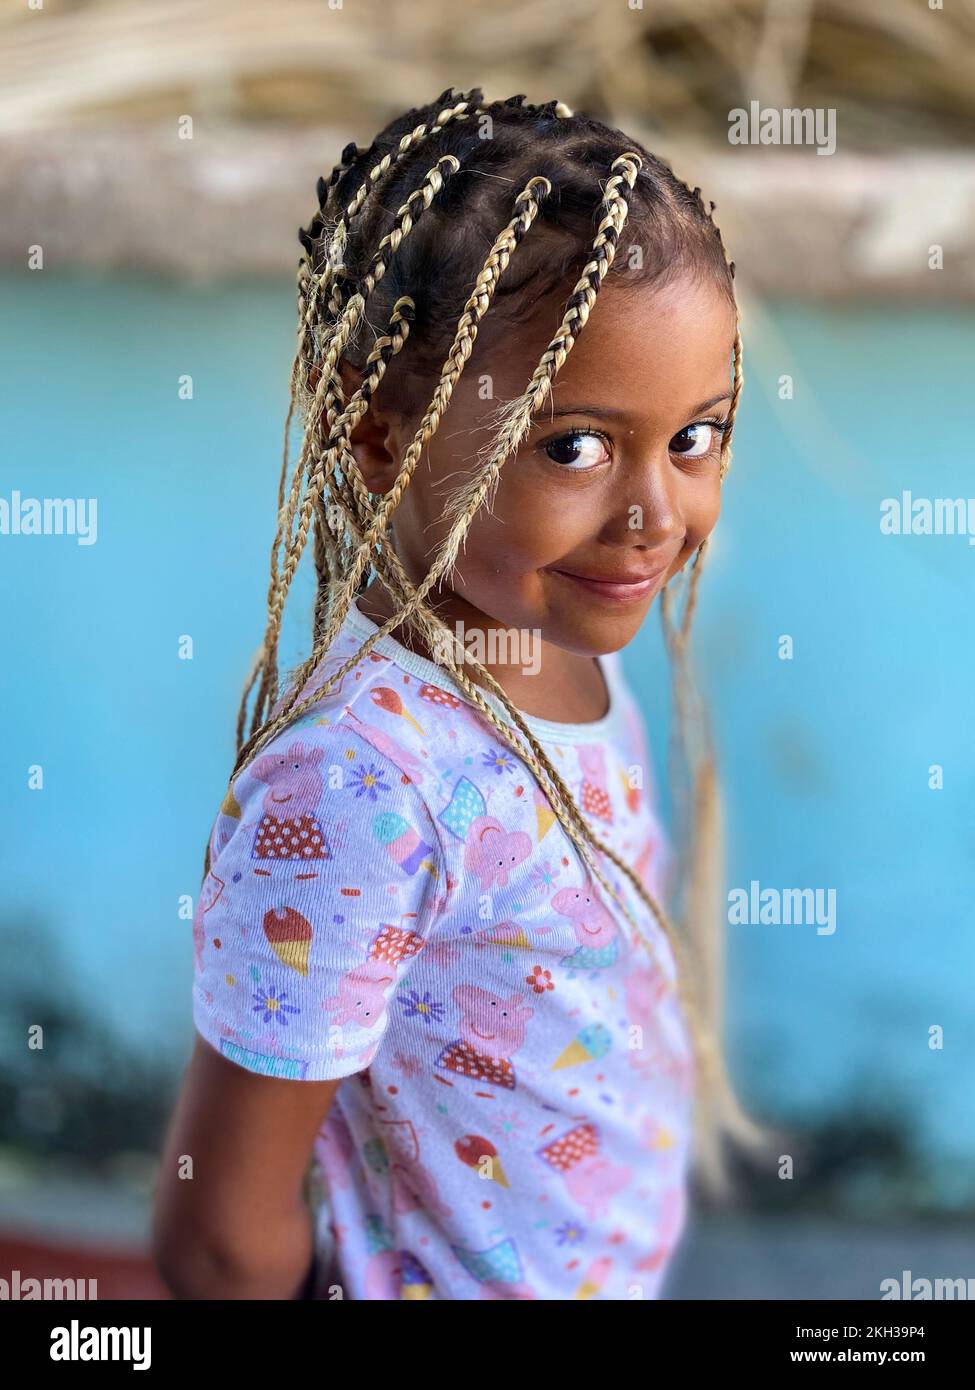 Portrait of a Colombian girl in Santa Cruz del Islote. This artificial hand-made island in the Colombian Caribbean, is considered one of the most densely populated places on earth. It has an average of 1.25 inhabitants per, and 65% of the population is under age. It is the most overcrowded island in the world. Stock Photo